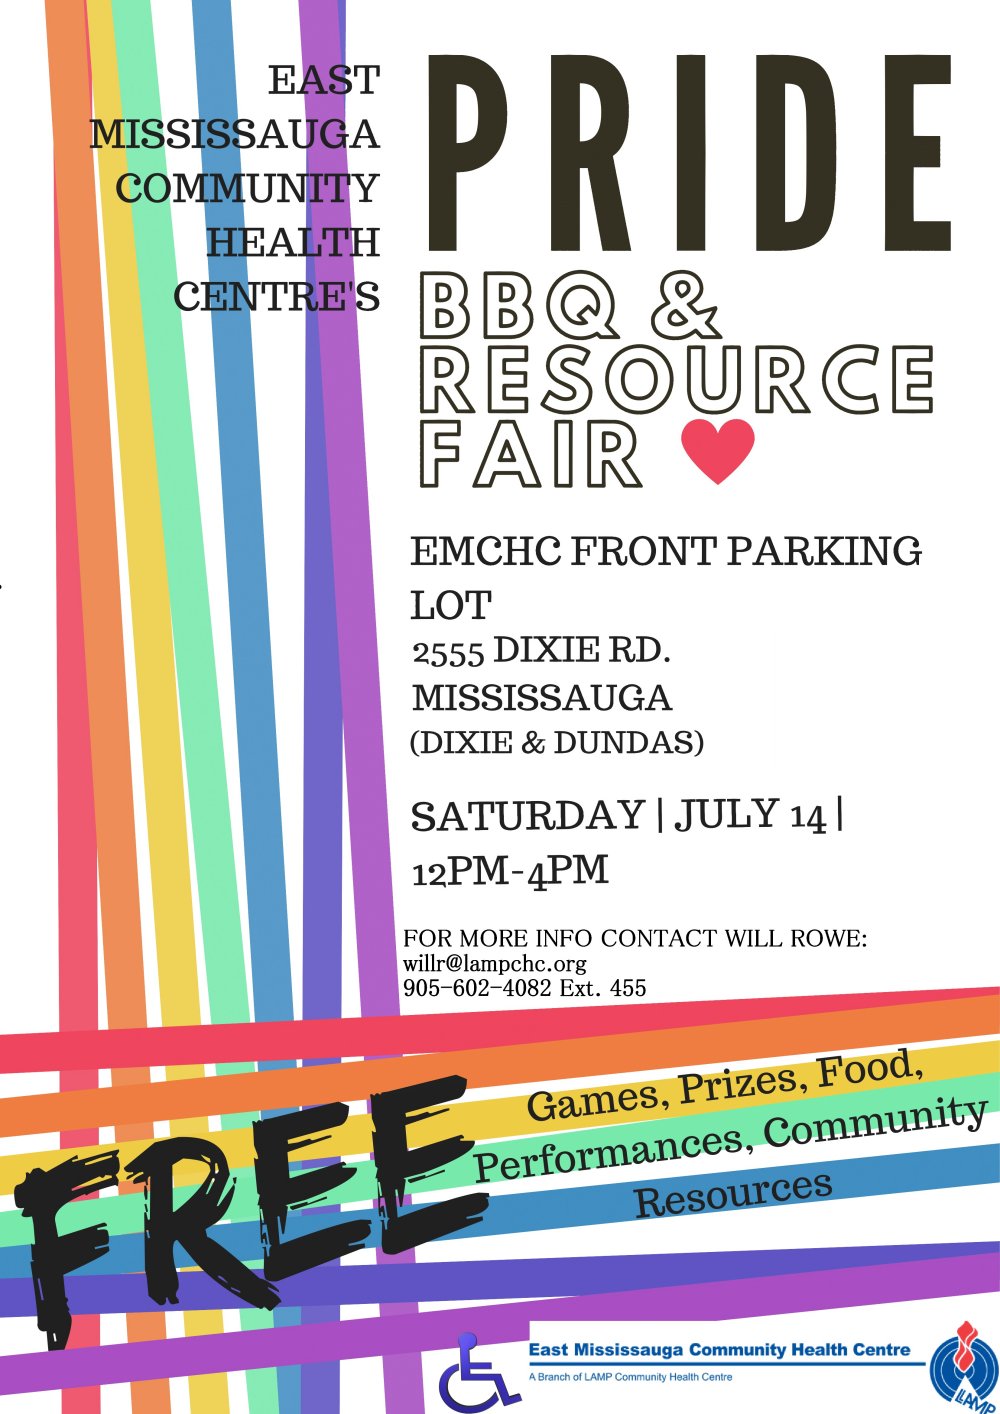 Pride BBQ Event 2018 Google image from http://www.lampchc.org/content/pride-celebration-and-resource-fair-east-mississauga/